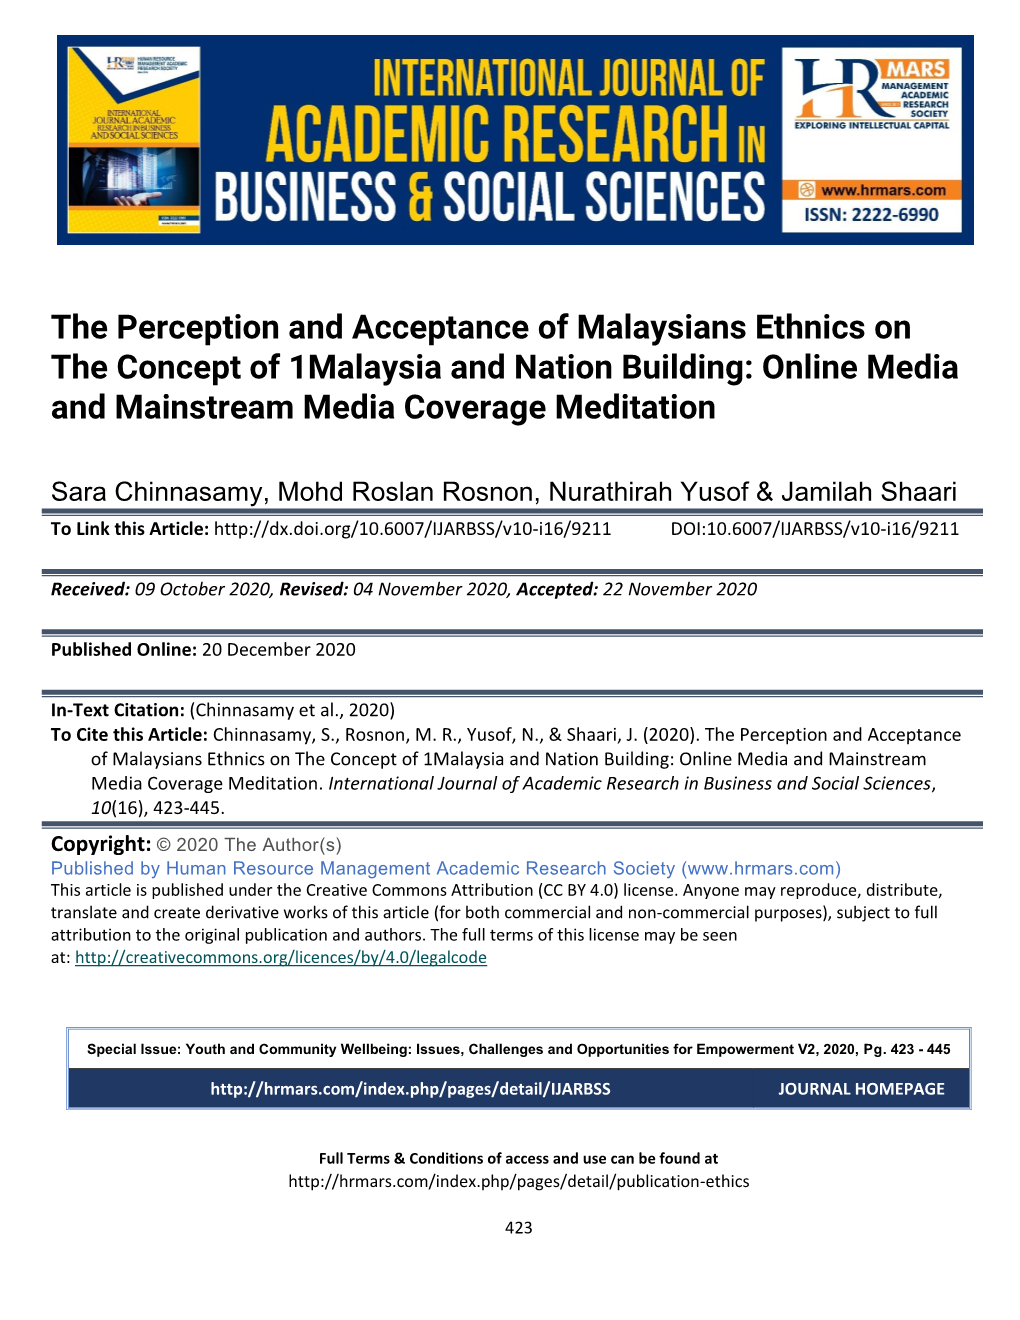 The Perception and Acceptance of Malaysians Ethnics on the Concept of 1Malaysia and Nation Building: Online Media and Mainstream Media Coverage Meditation